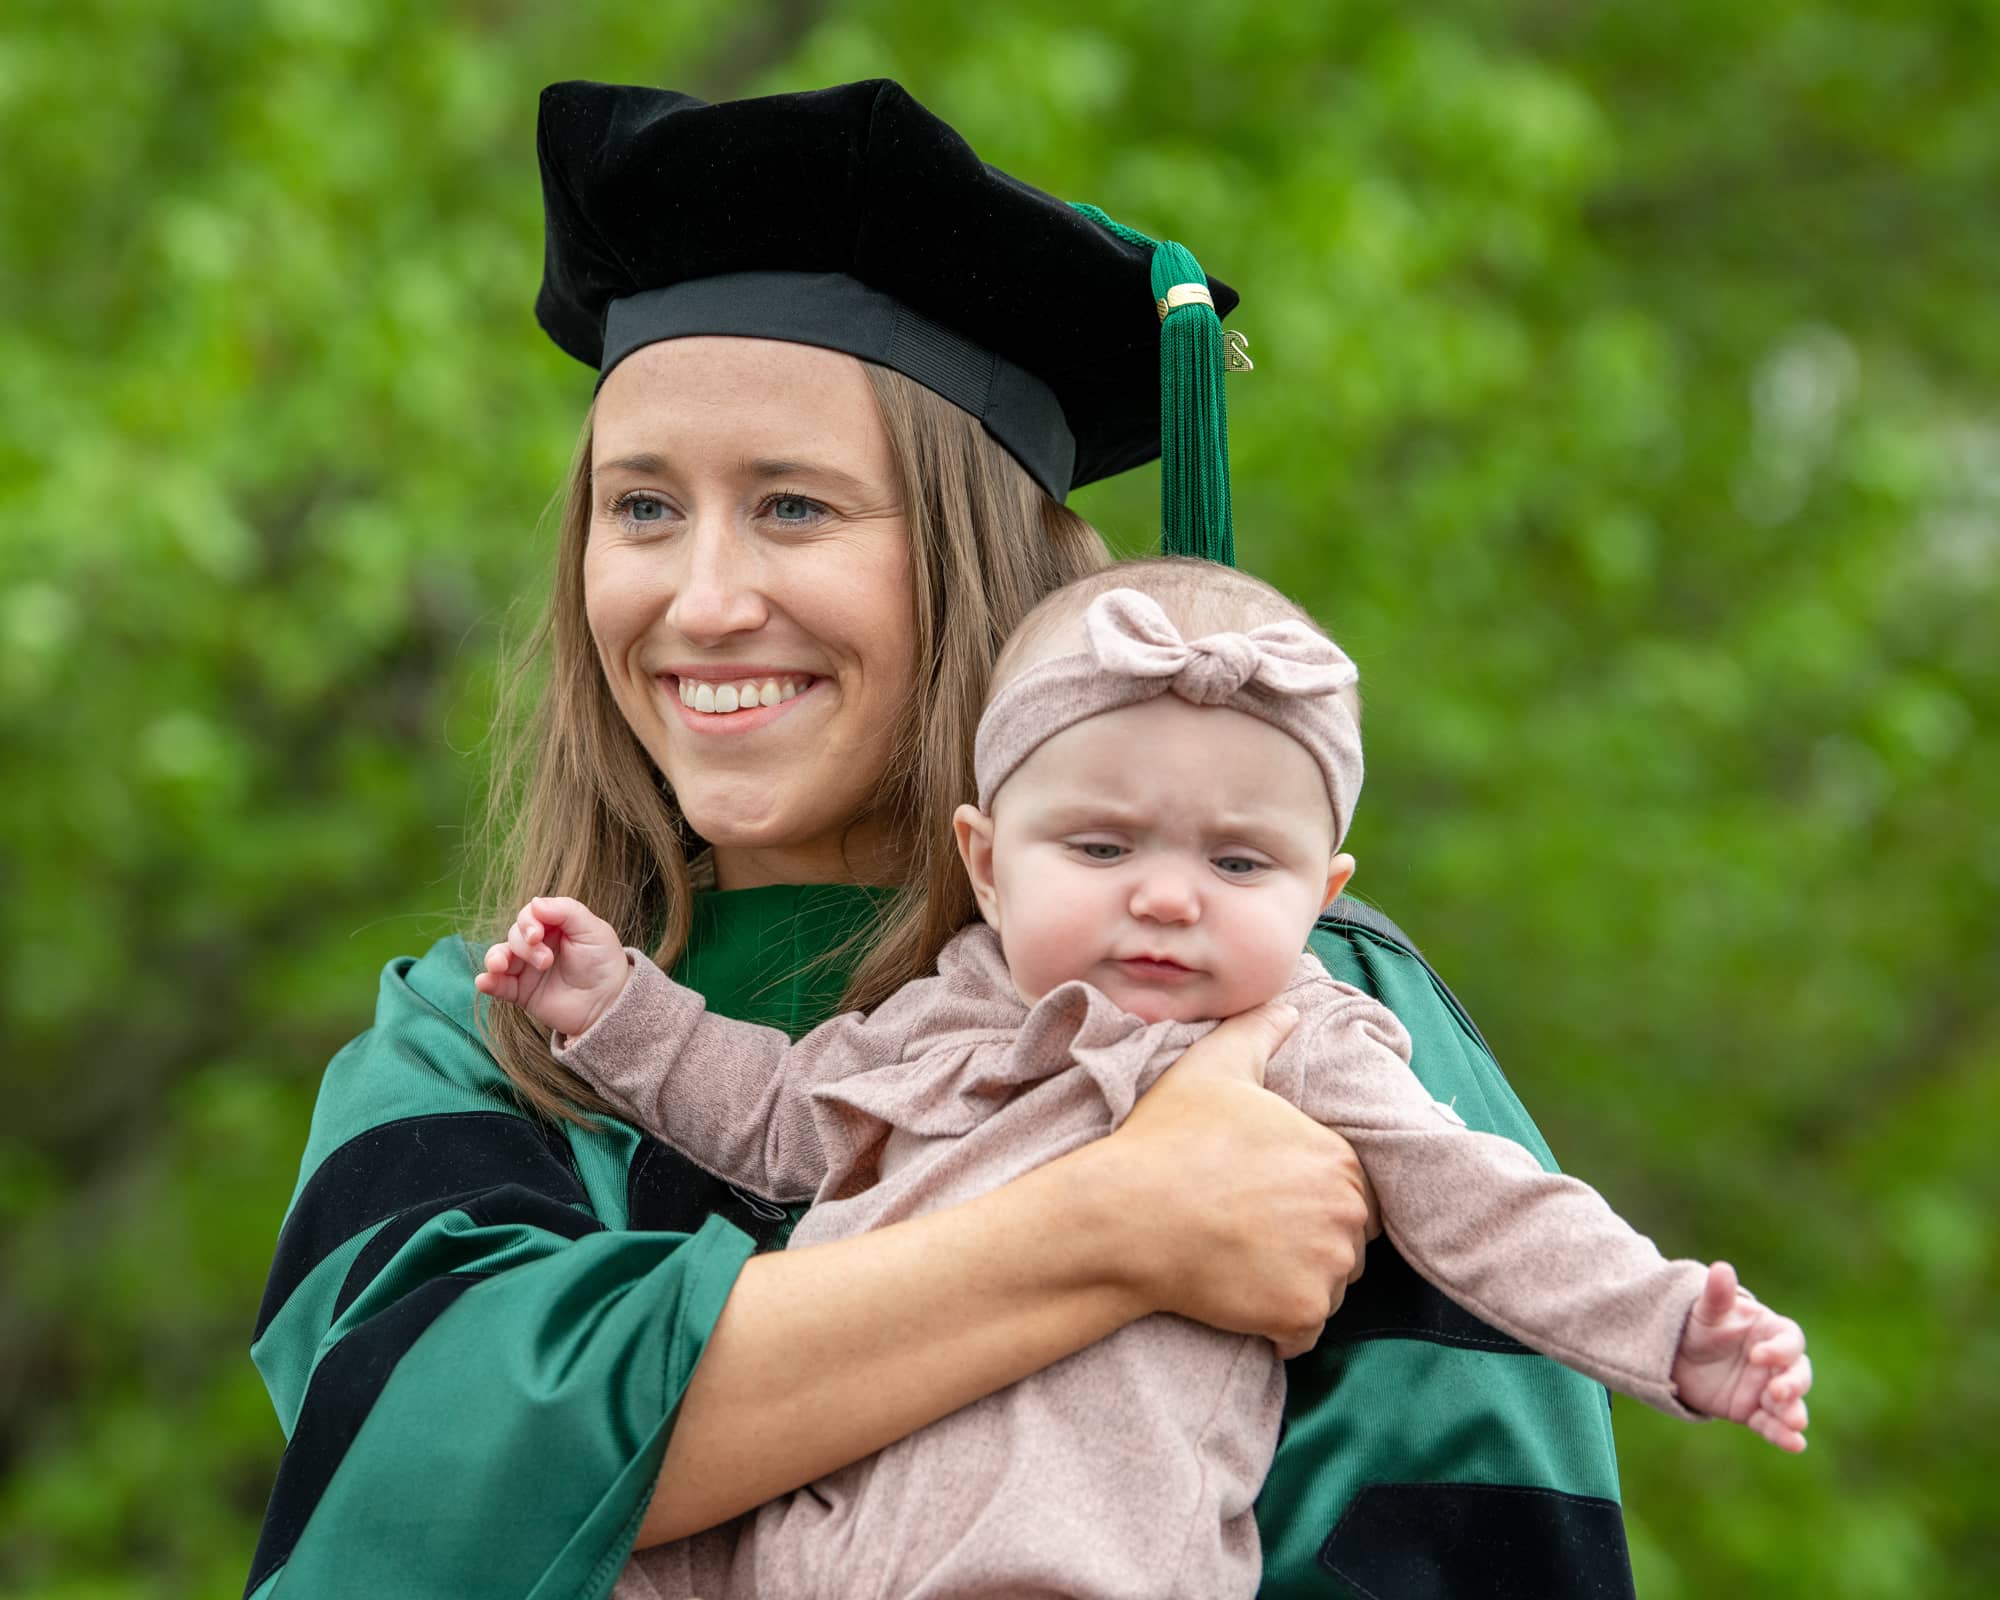 A Heritage College graduate poses for a photo with a baby following commencement.